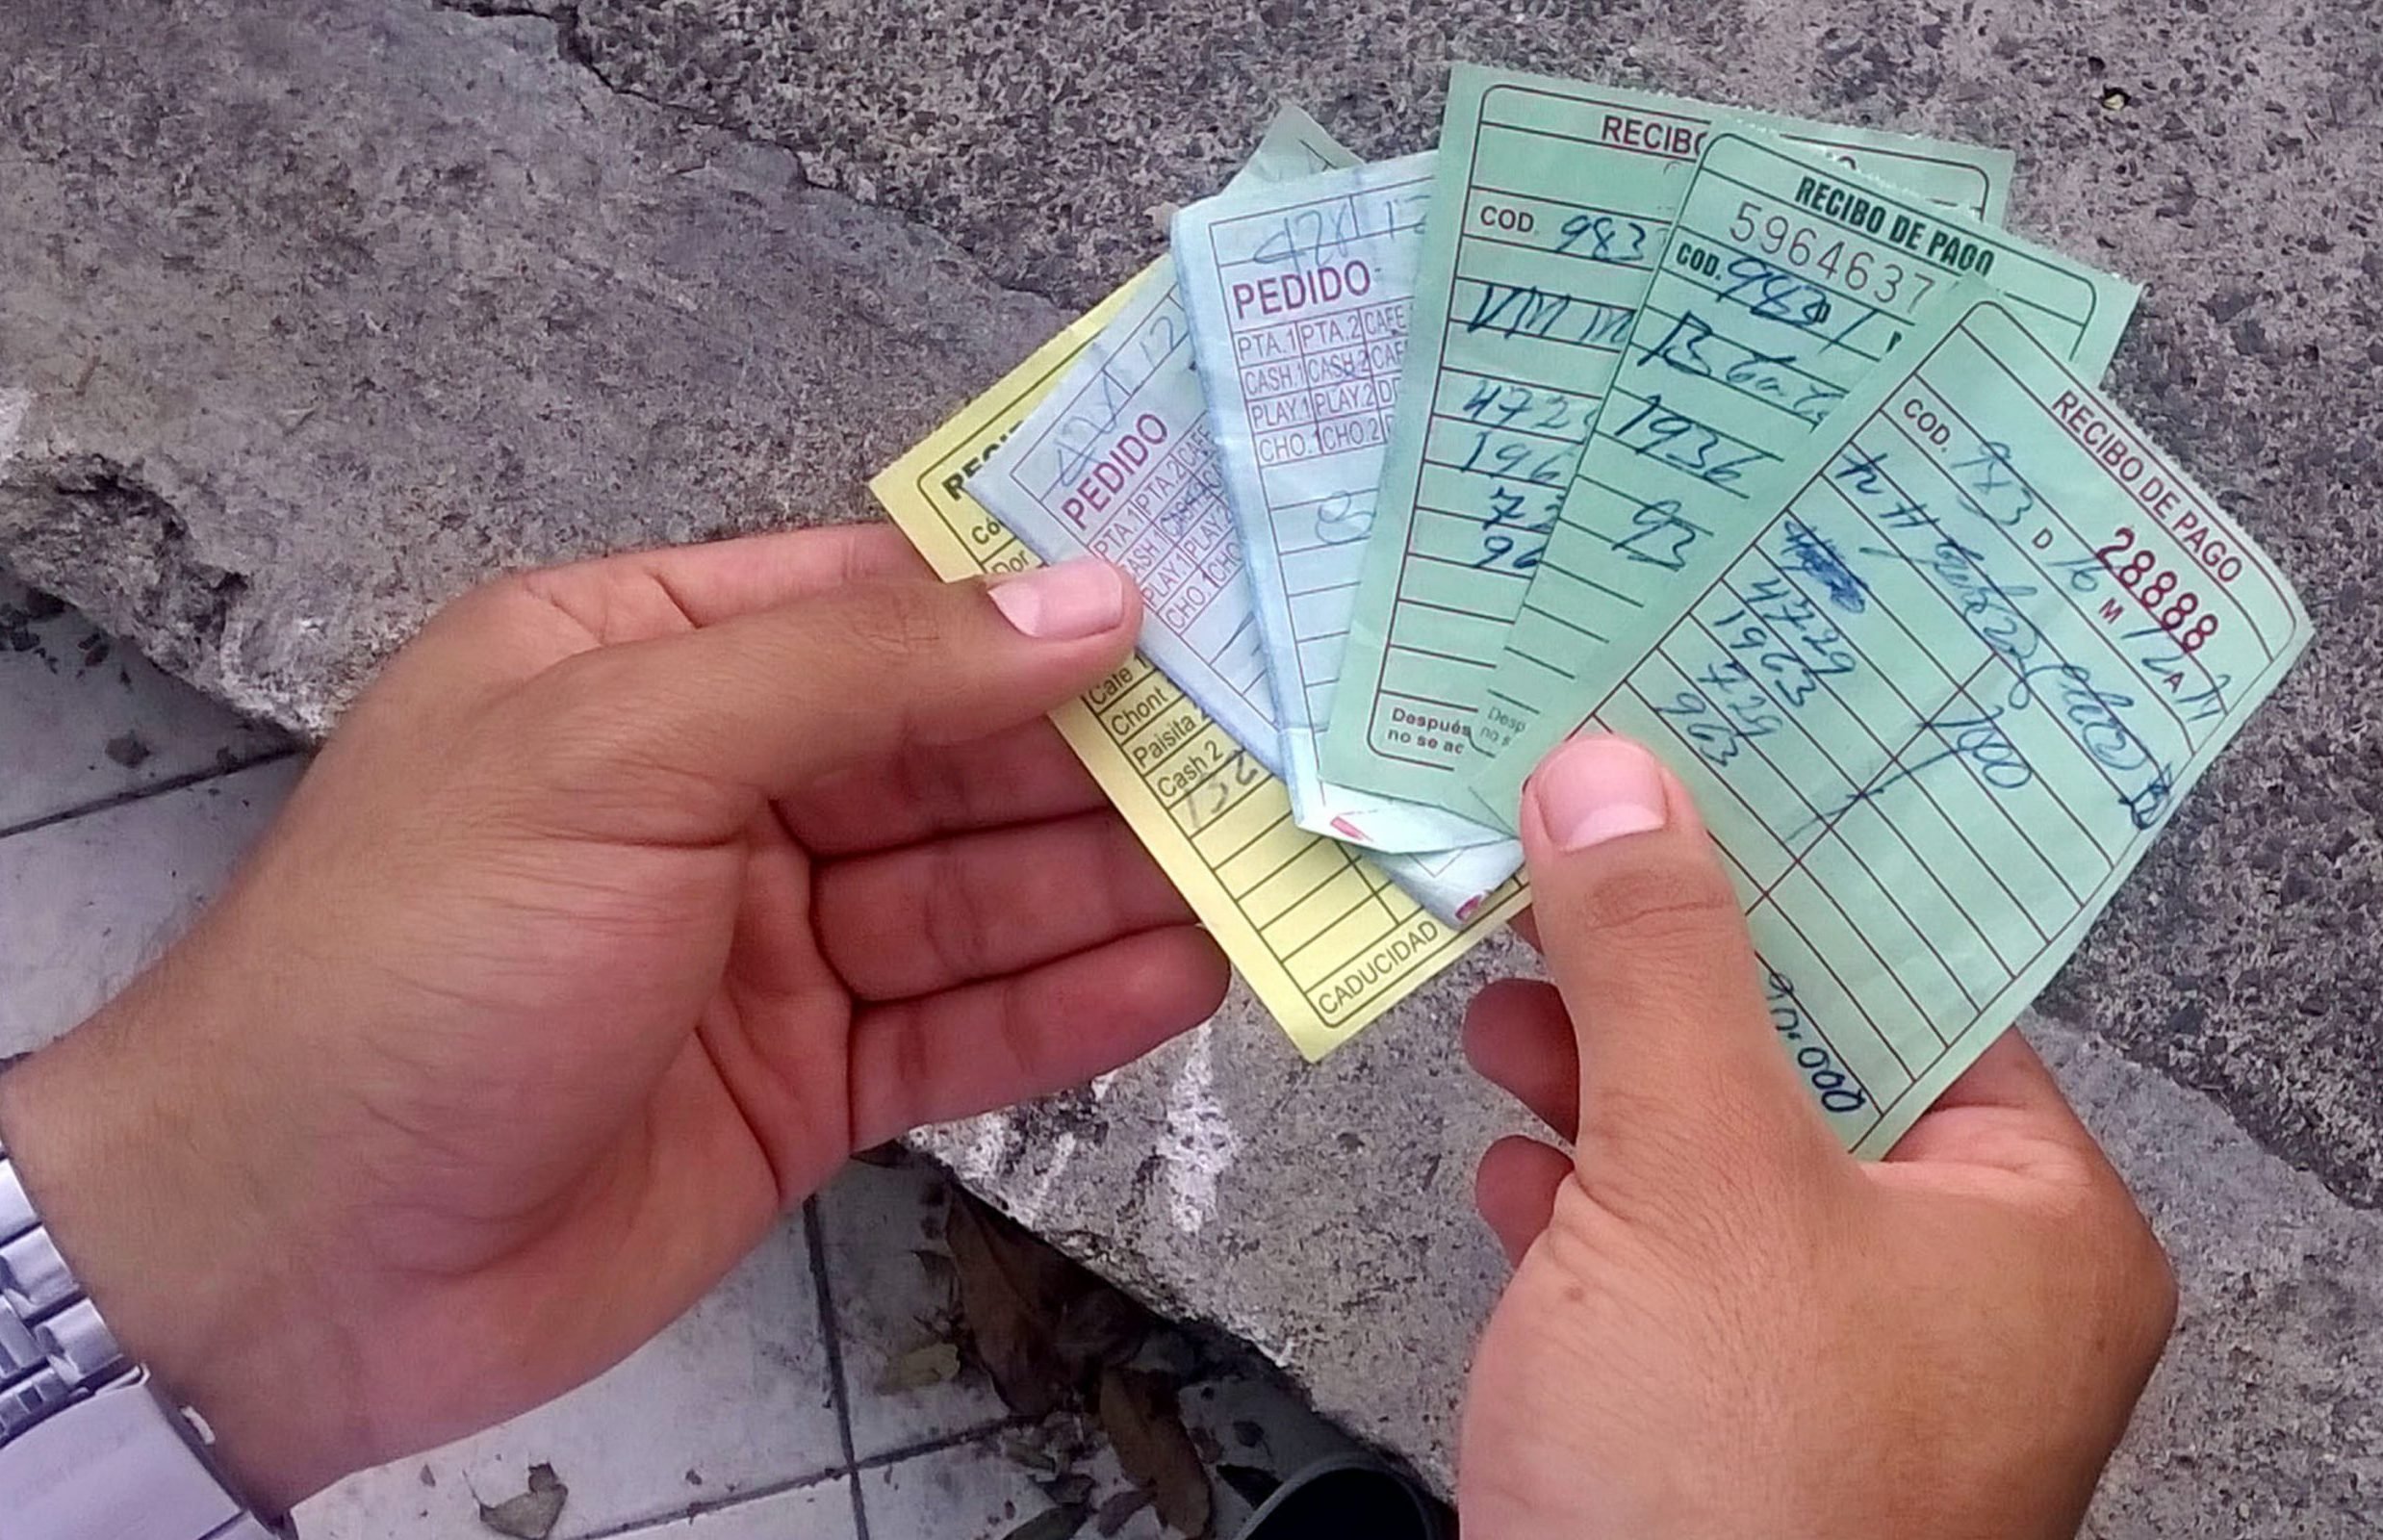 Illegal lottery tickets